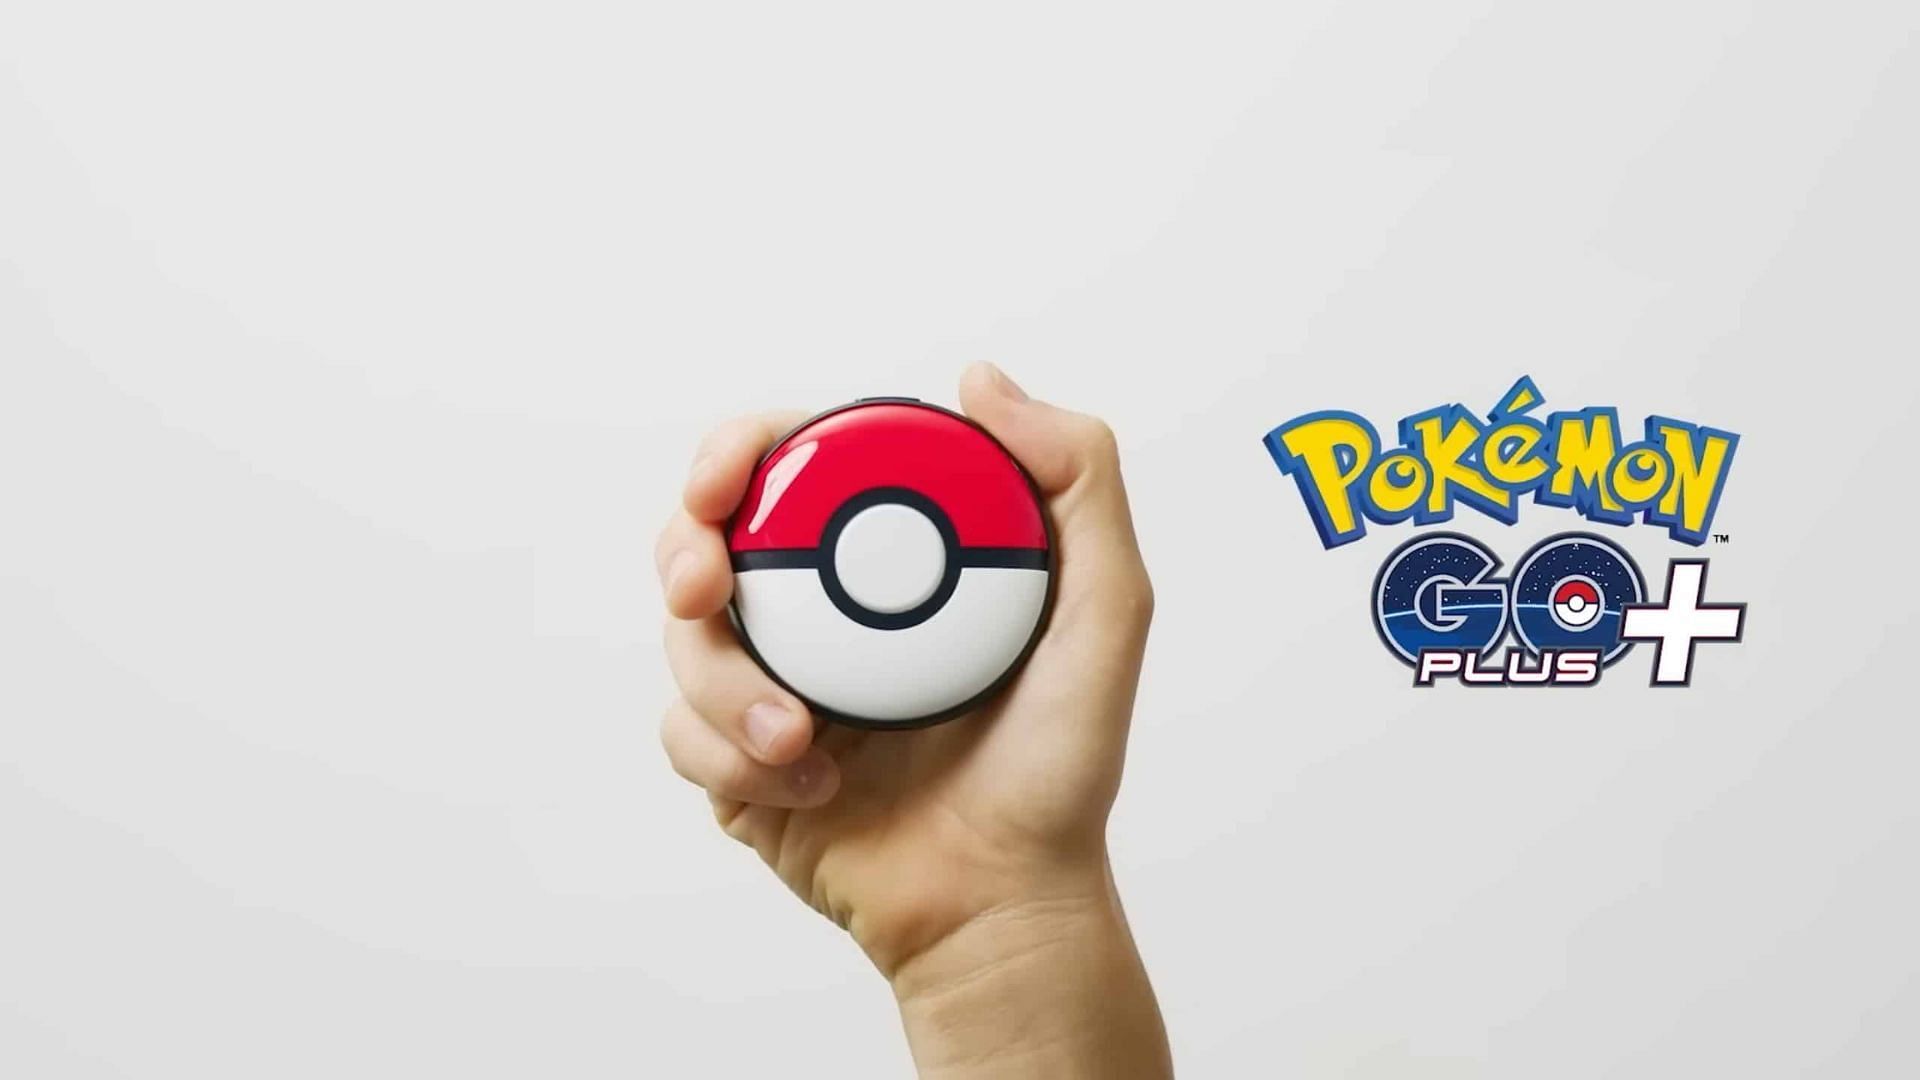 5 things to know about Pokemon GO Plus +